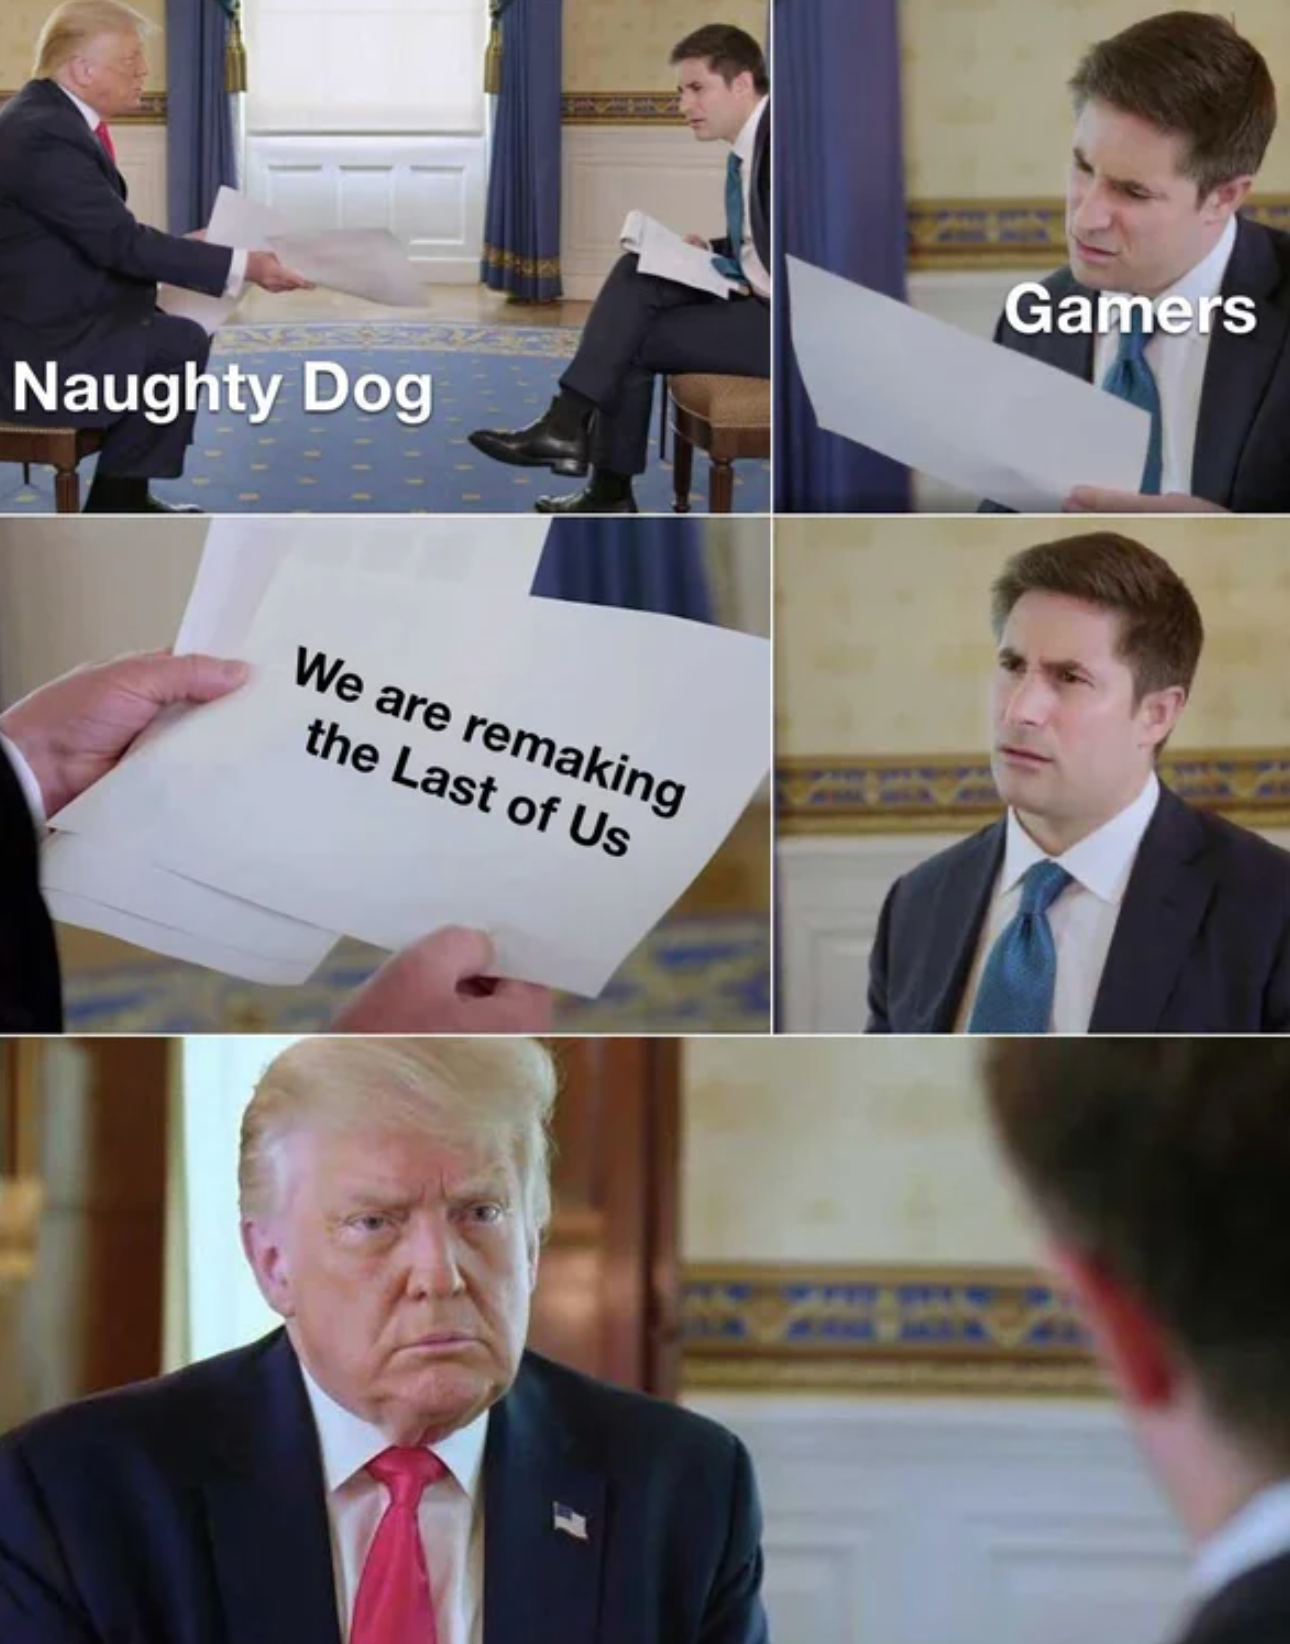 funny gaming memes - donald trump interview meme template - Gamers Naughty Dog We are remaking the Last of Us